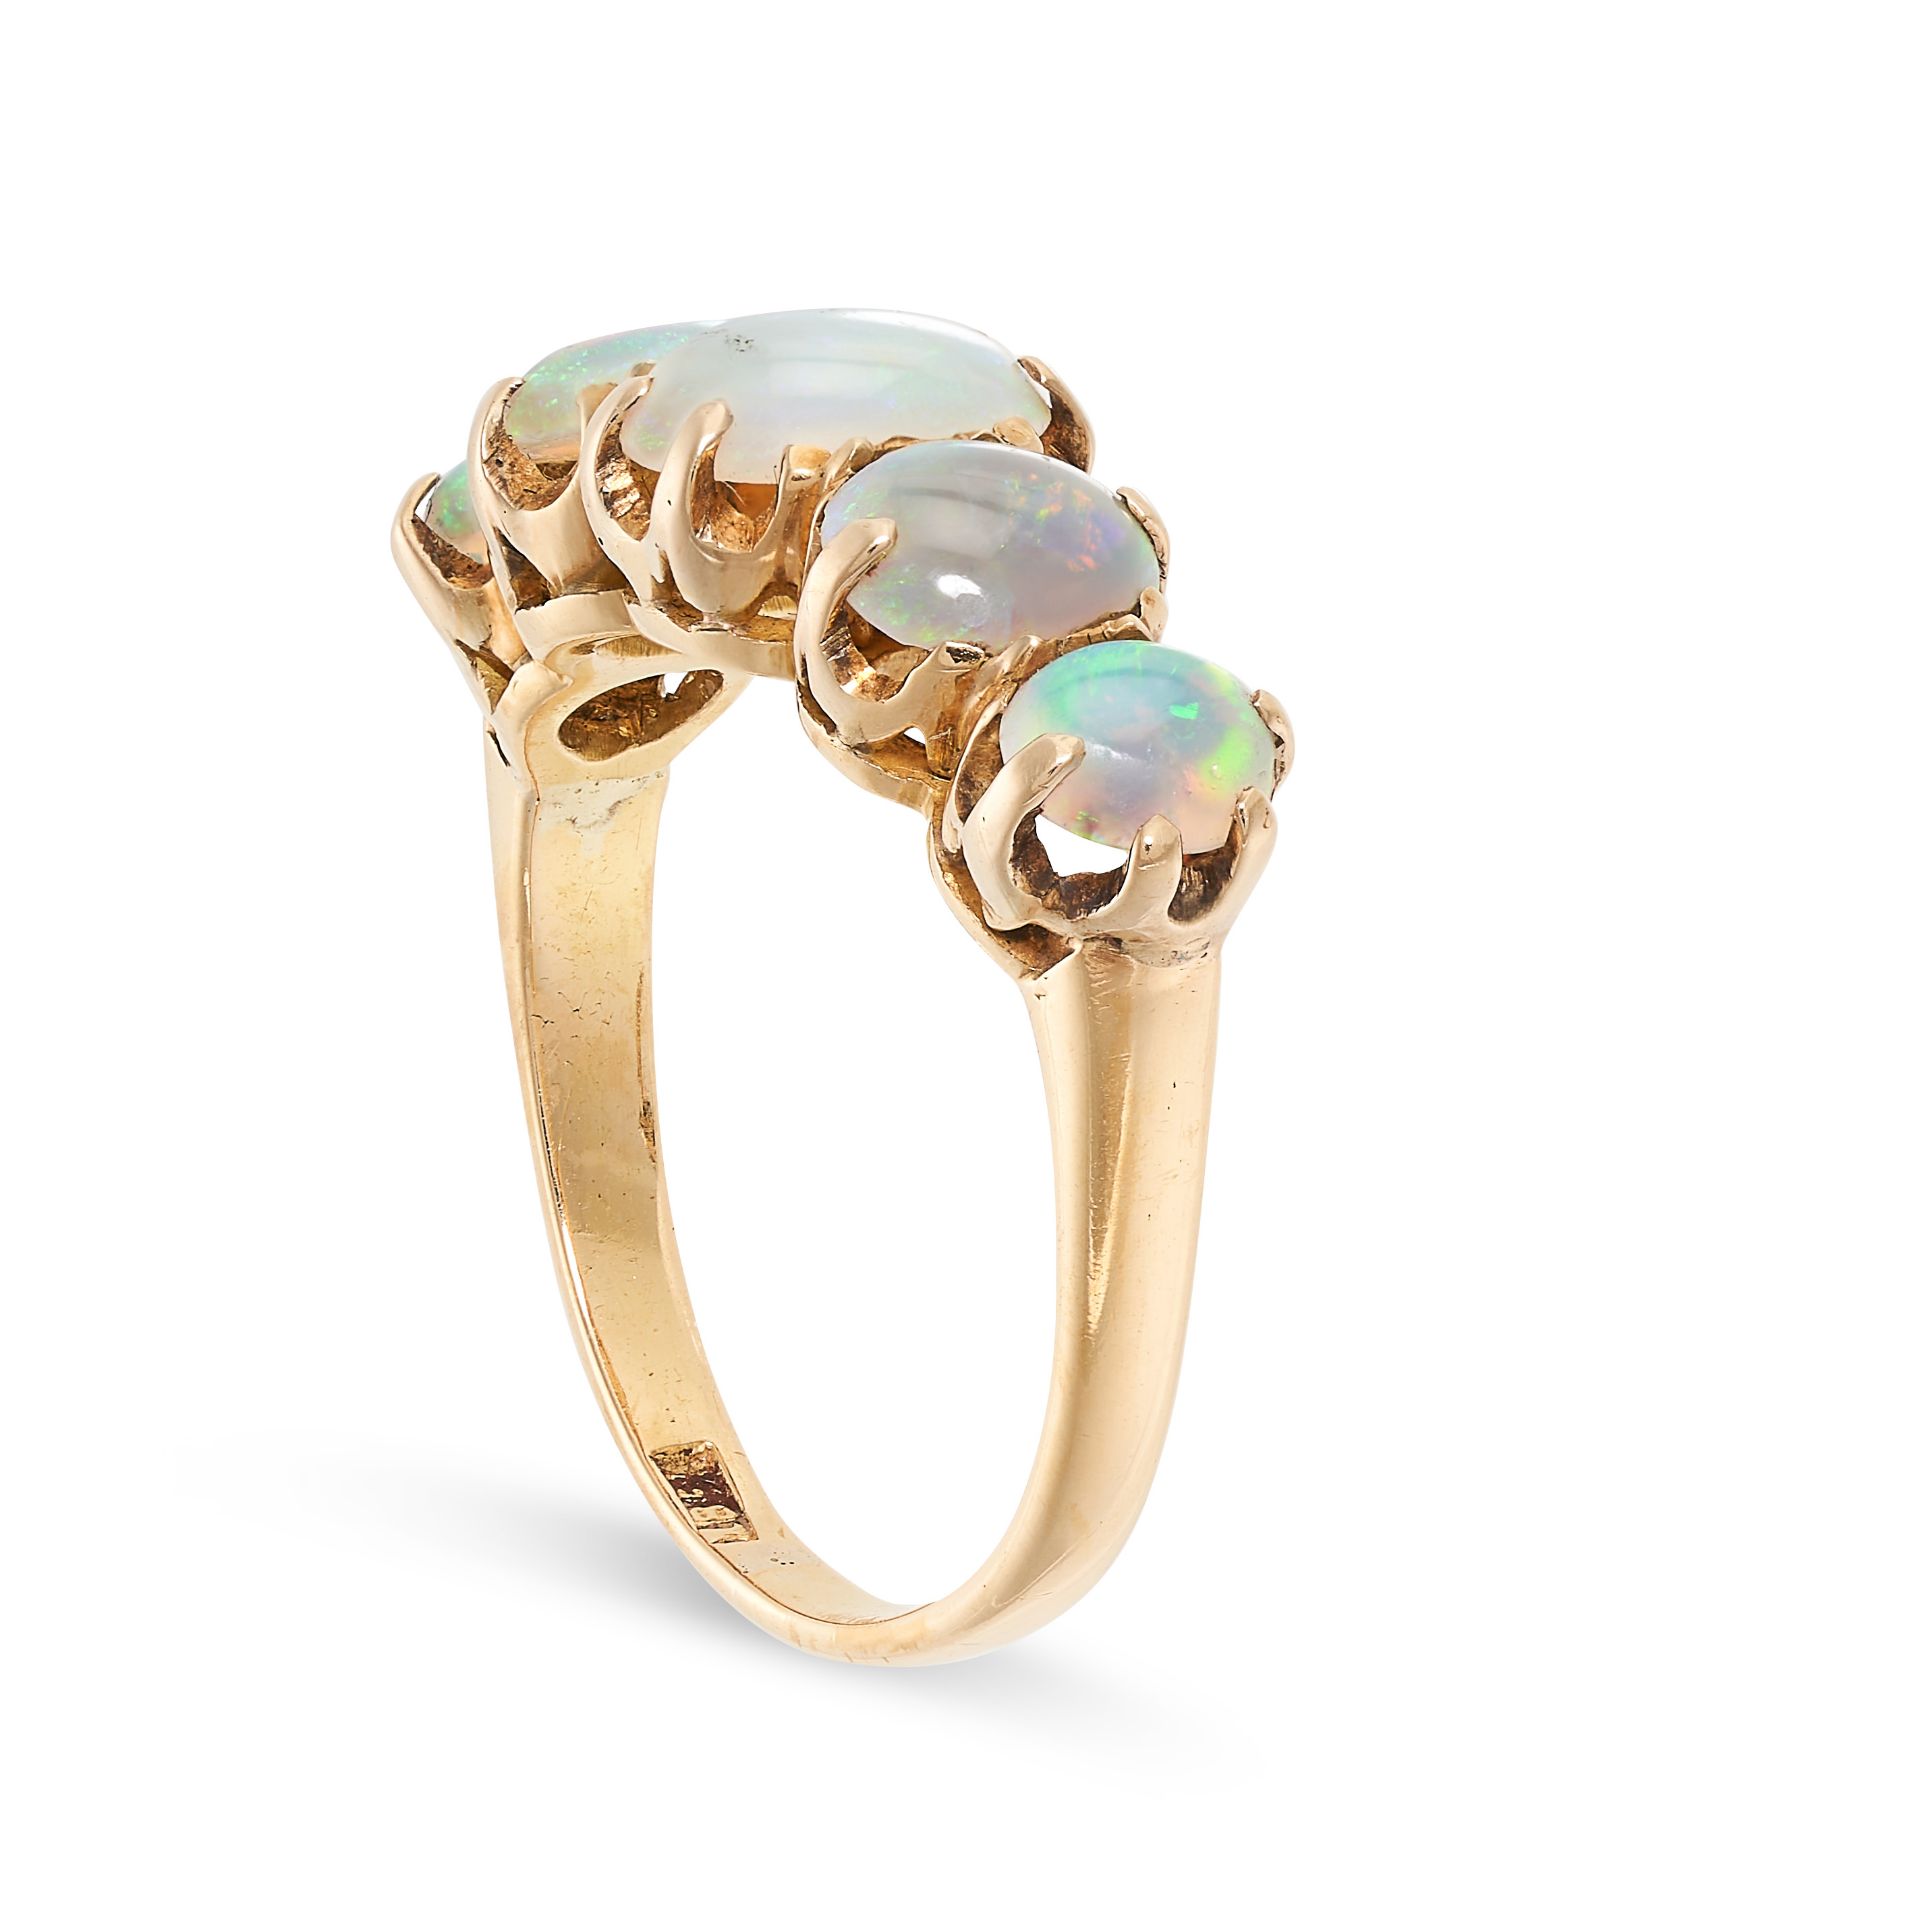 AN ANTIQUE OPAL FIVE STONE RING in 18ct yellow gold, set with five graduated oval cabochon opals, - Image 2 of 2